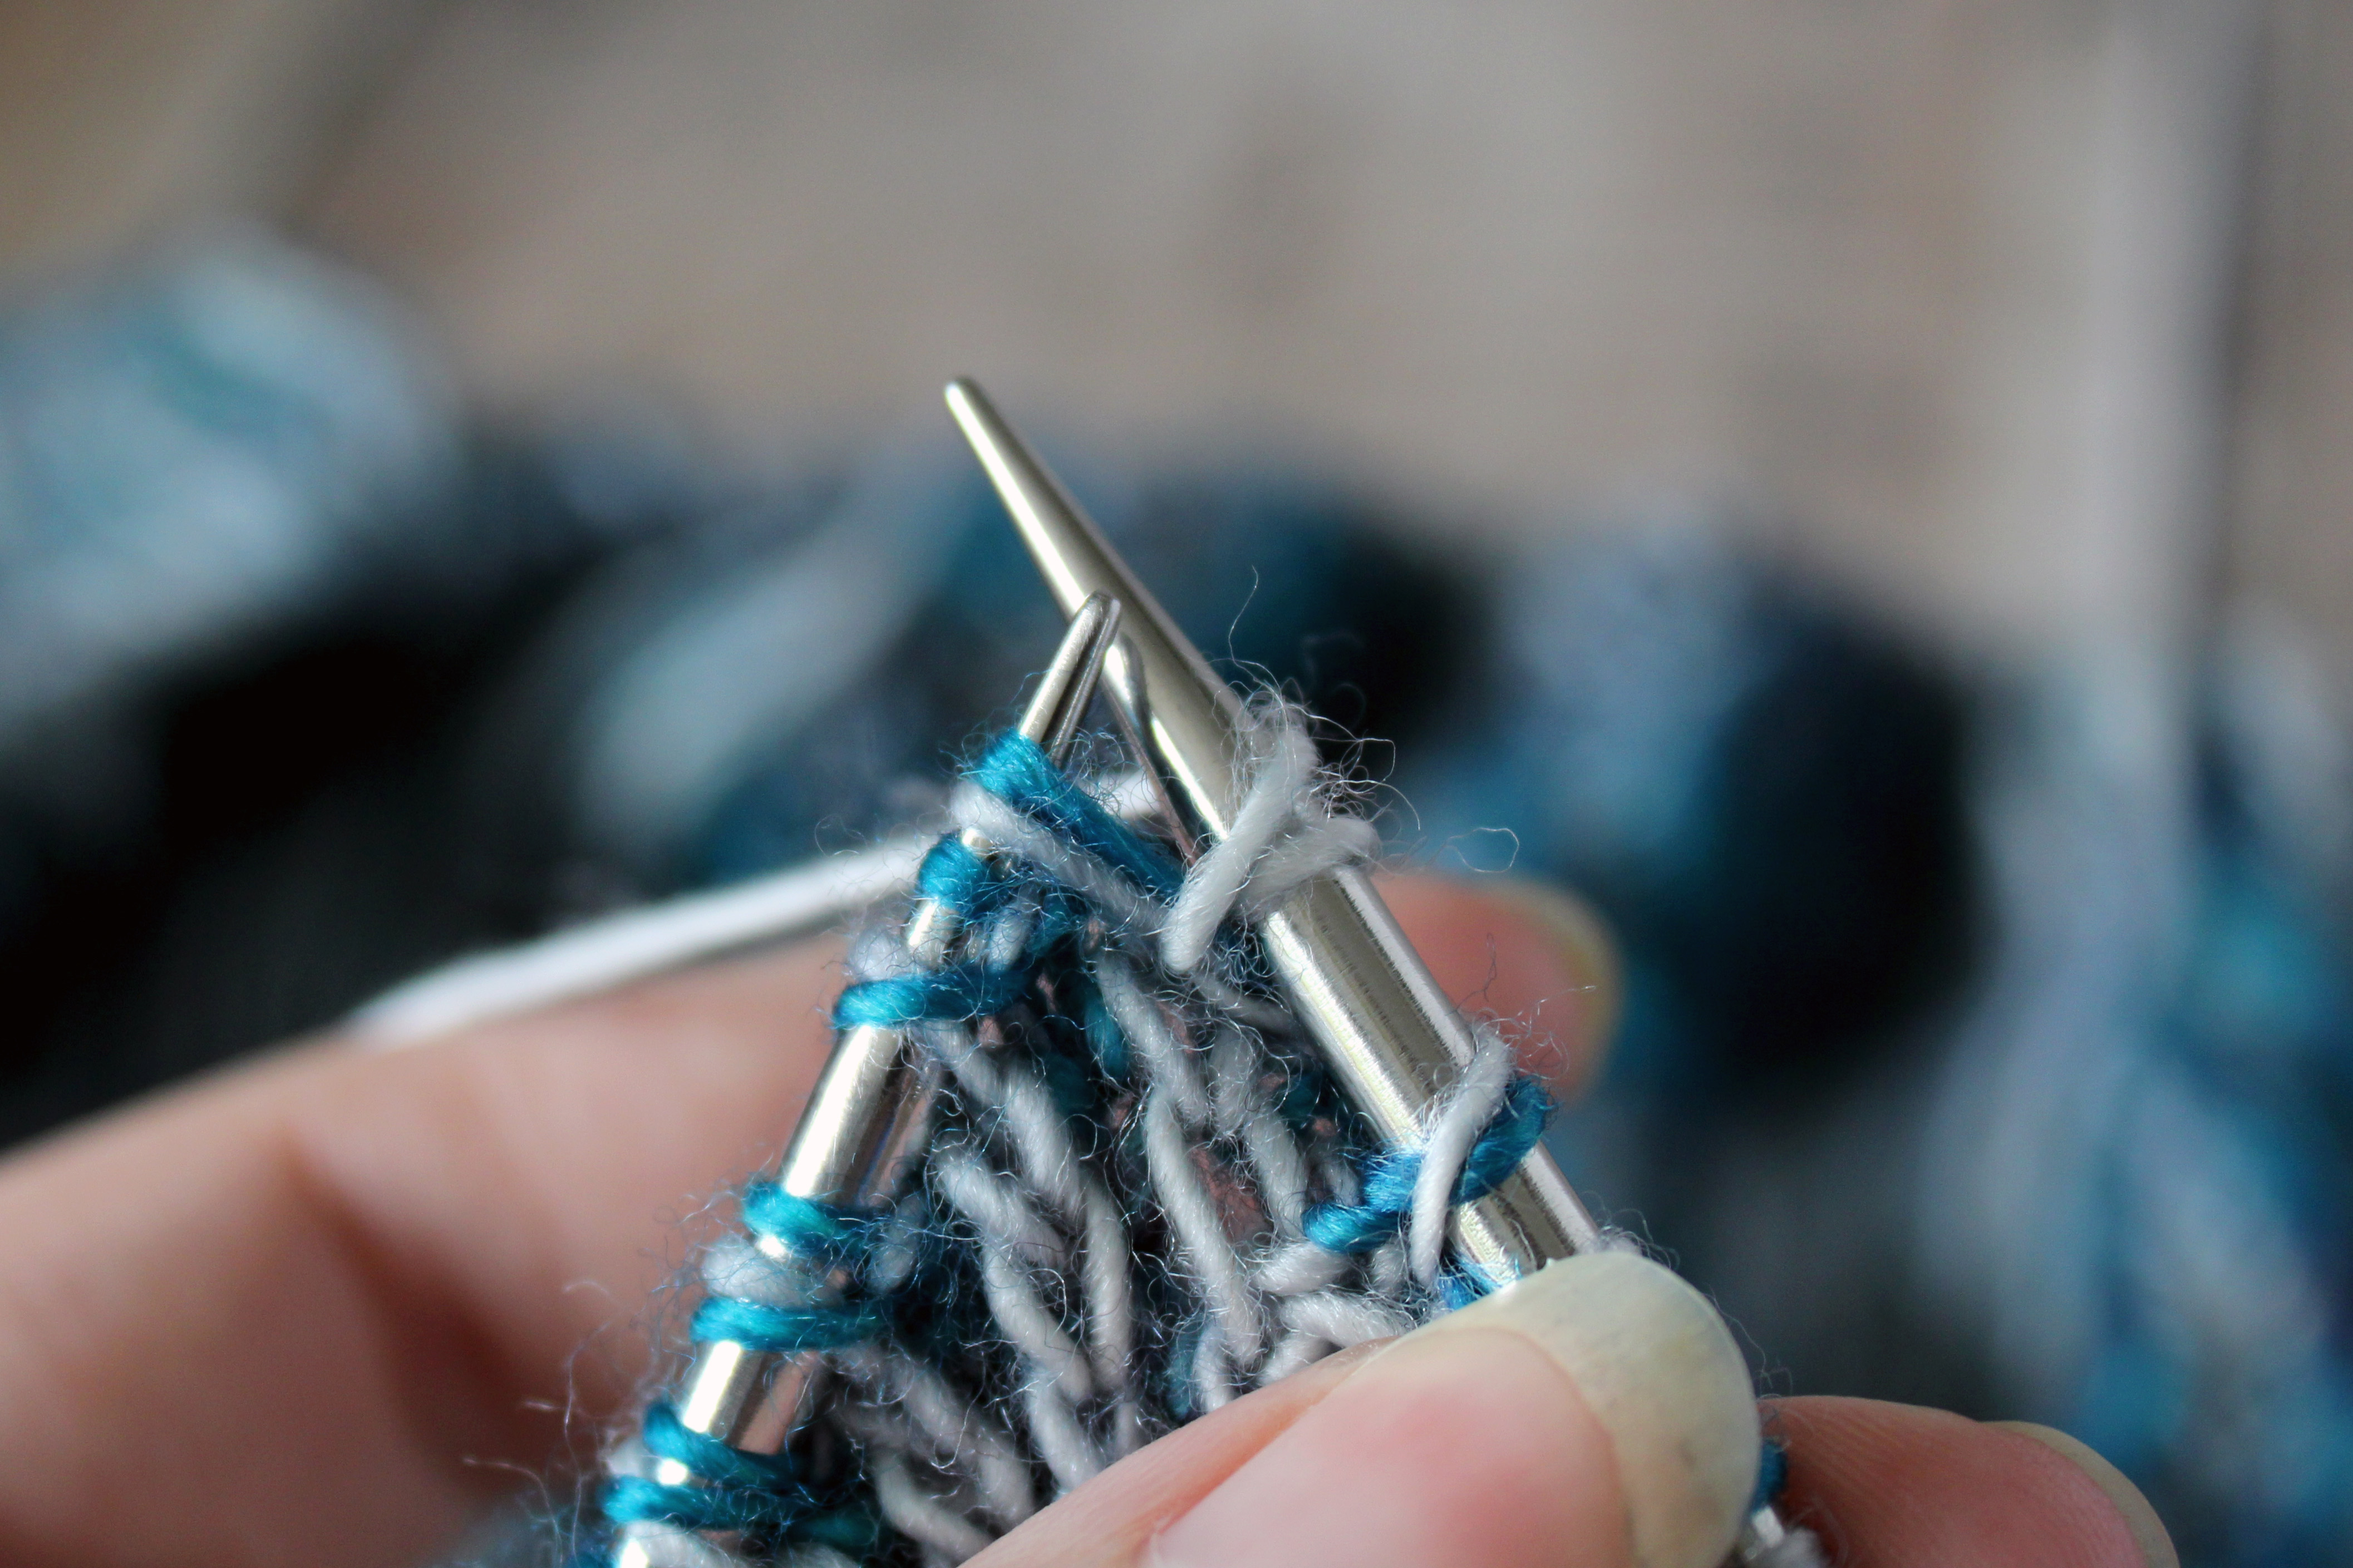 The right needle with a purl stitch and yarn over, the left needle still holds the original stitch.